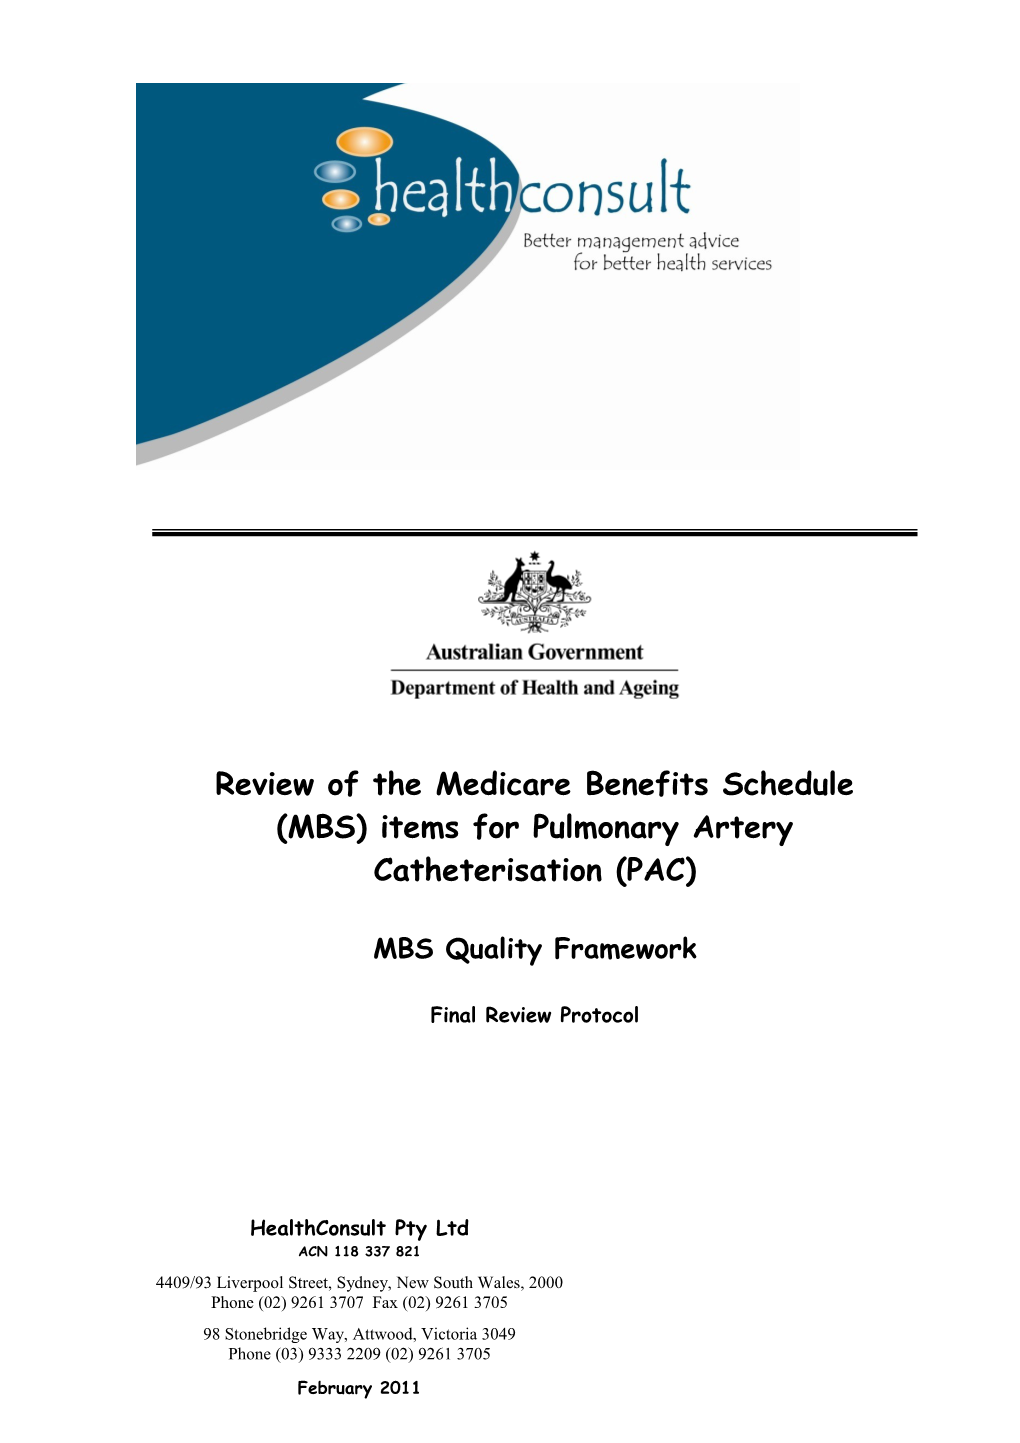 Review of the Medicare Benefits Schedule (MBS) Items for Pulmonary Artery Catheterisation